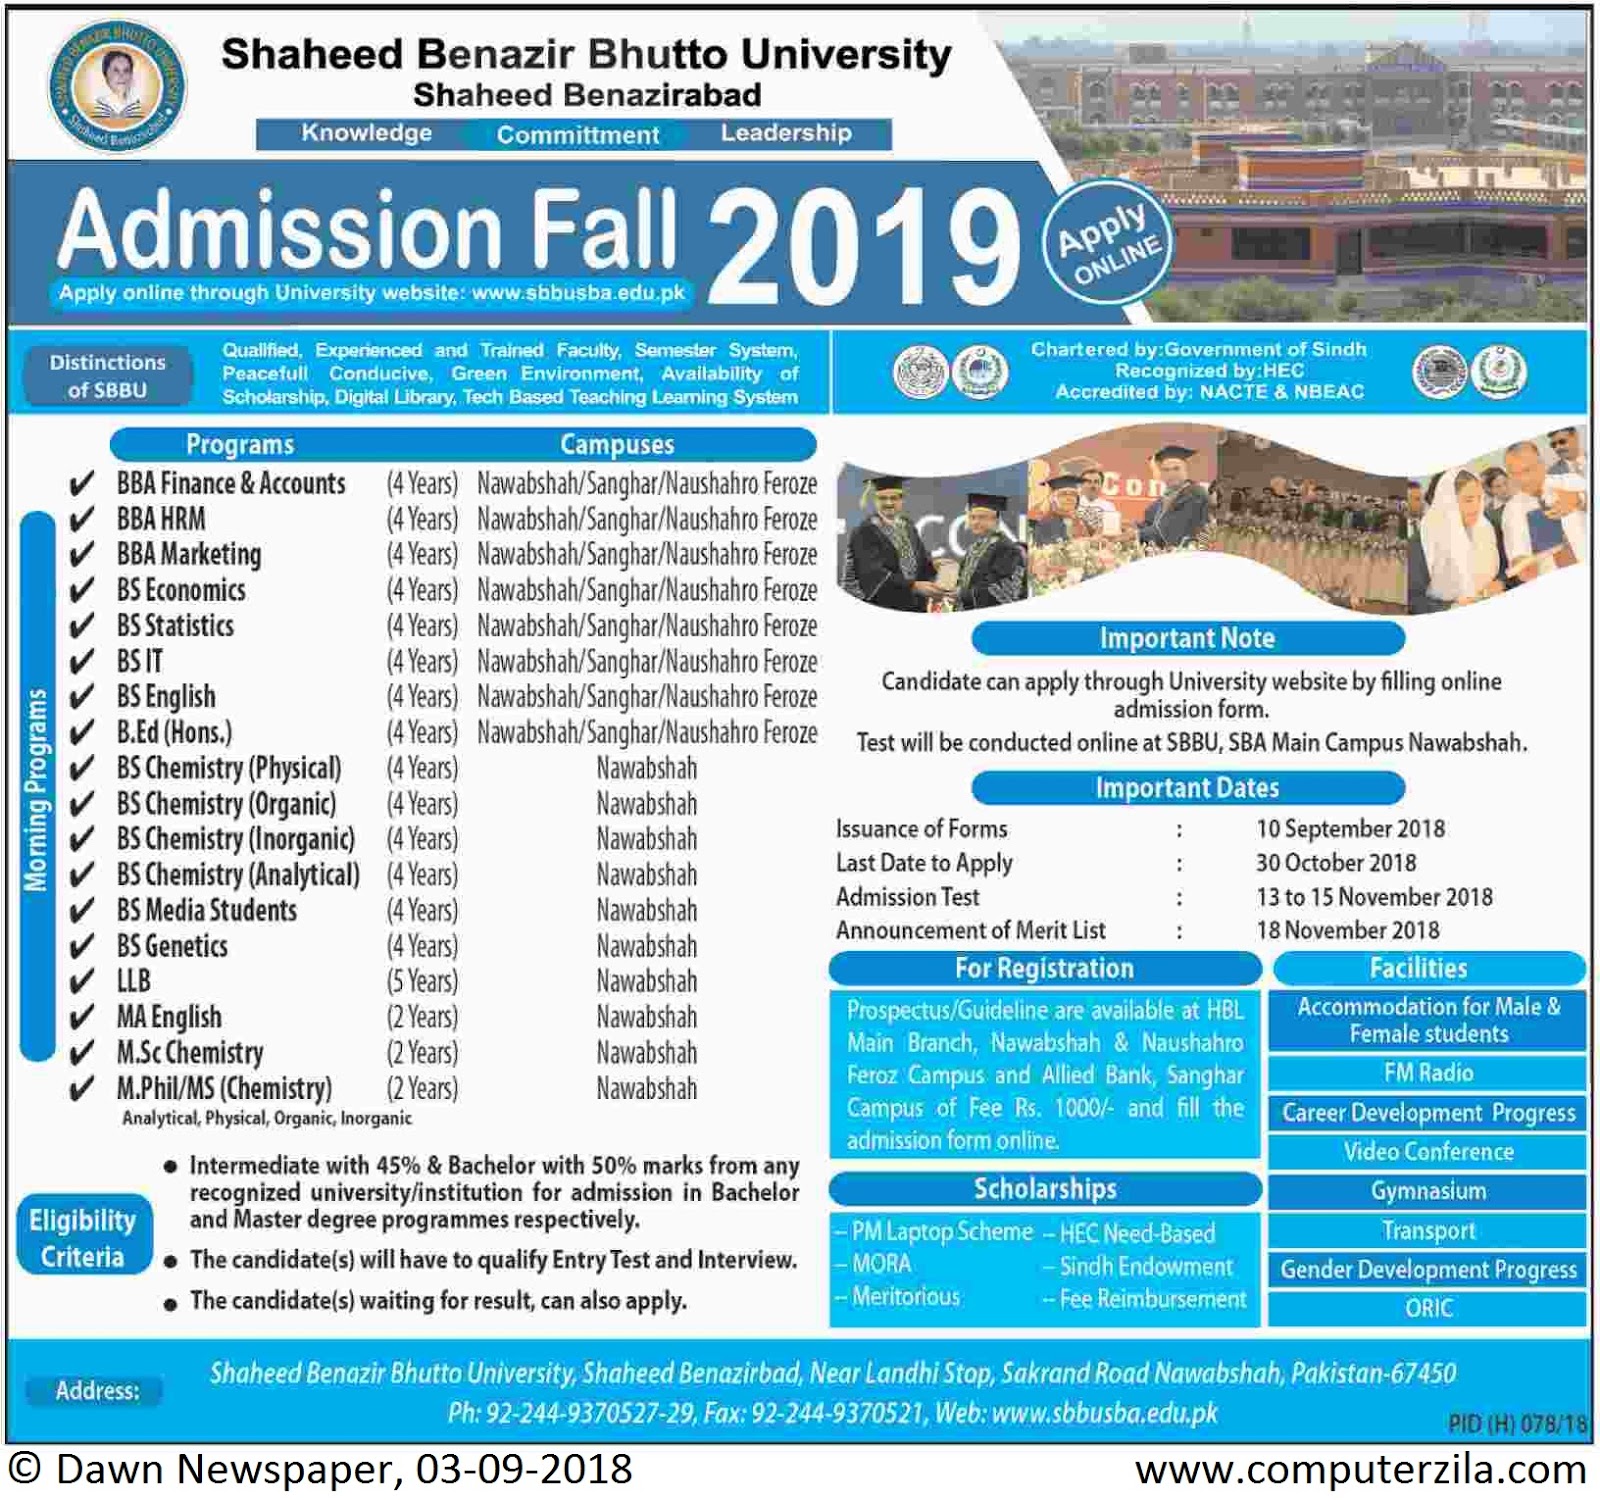 Admissions Open For Fall 2019 At SBBUSBA Nawabshah Campus